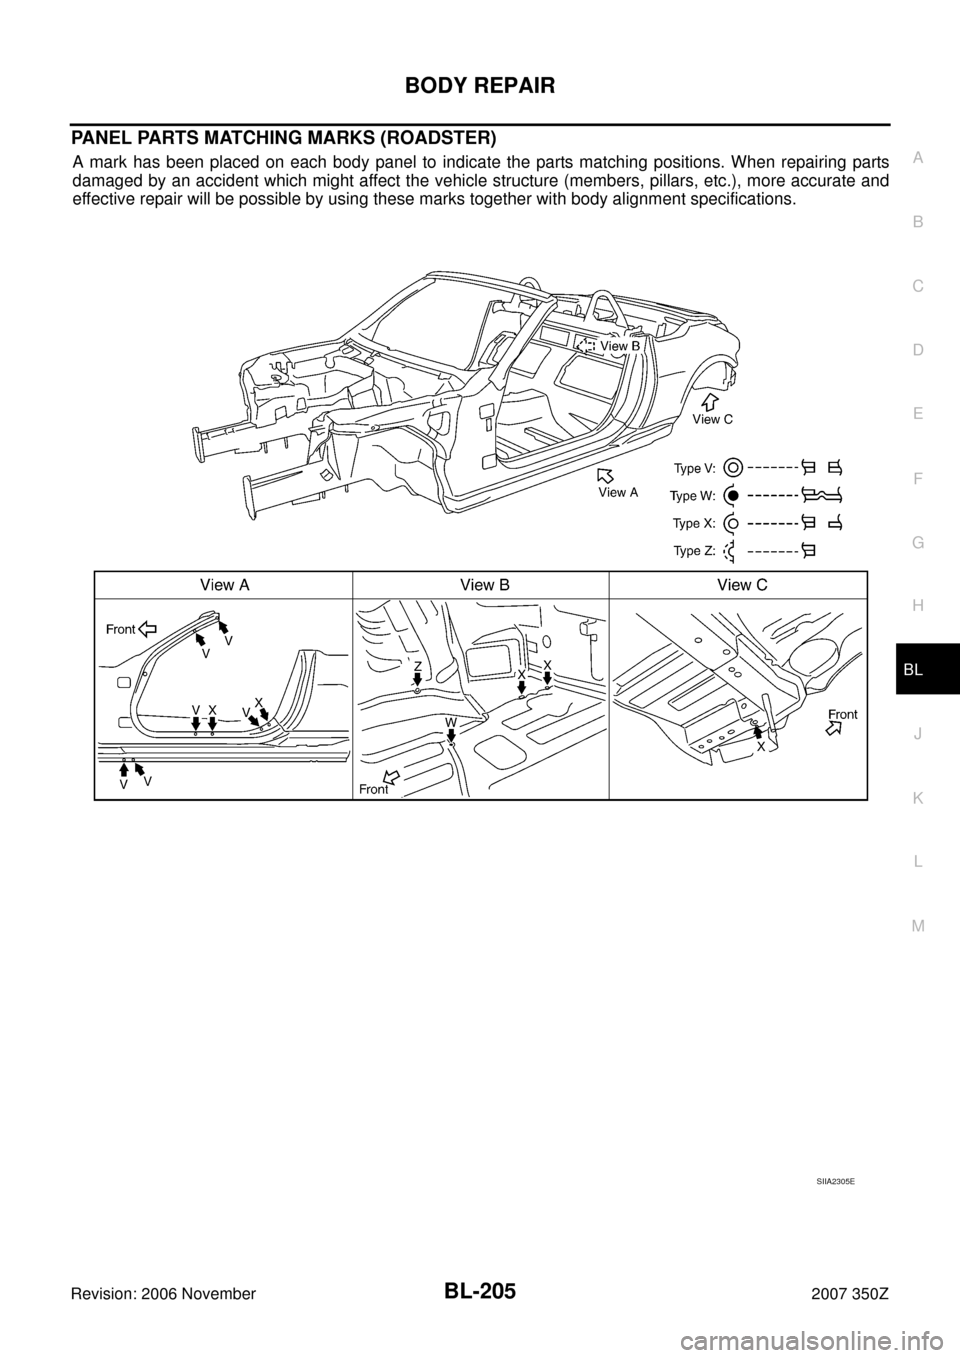 NISSAN 350Z 2007 Z33 Body, Lock And Security System Workshop Manual BODY REPAIR
BL-205
C
D
E
F
G
H
J
K
L
MA
B
BL
Revision: 2006 November2007 350Z
PANEL PARTS MATCHING MARKS (ROADSTER)
A mark has been placed on each body panel to indicate the parts matching positions. 